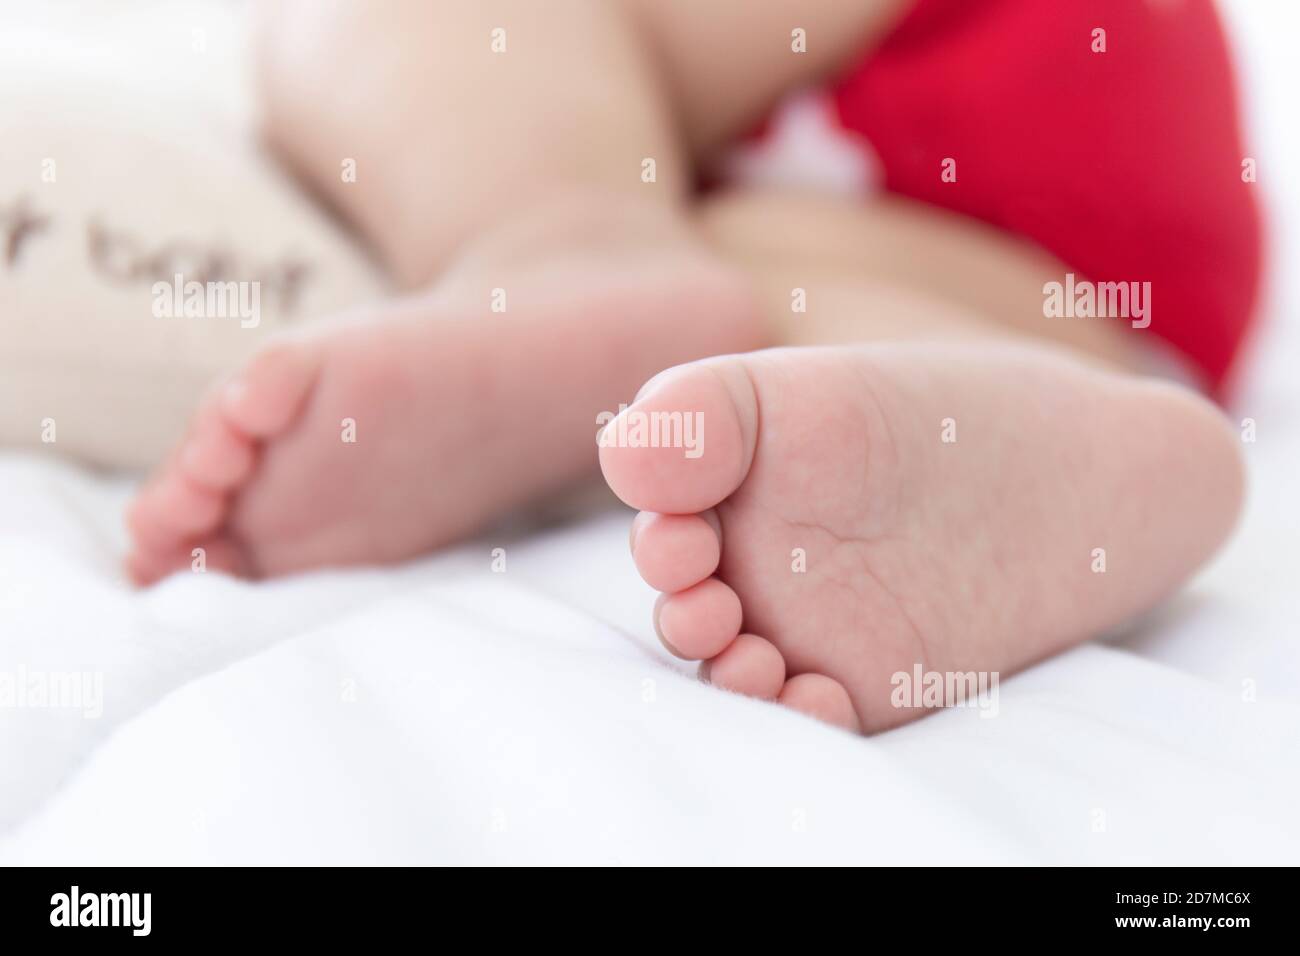 The baby's feet are sleeping in the bed. Stock Photo